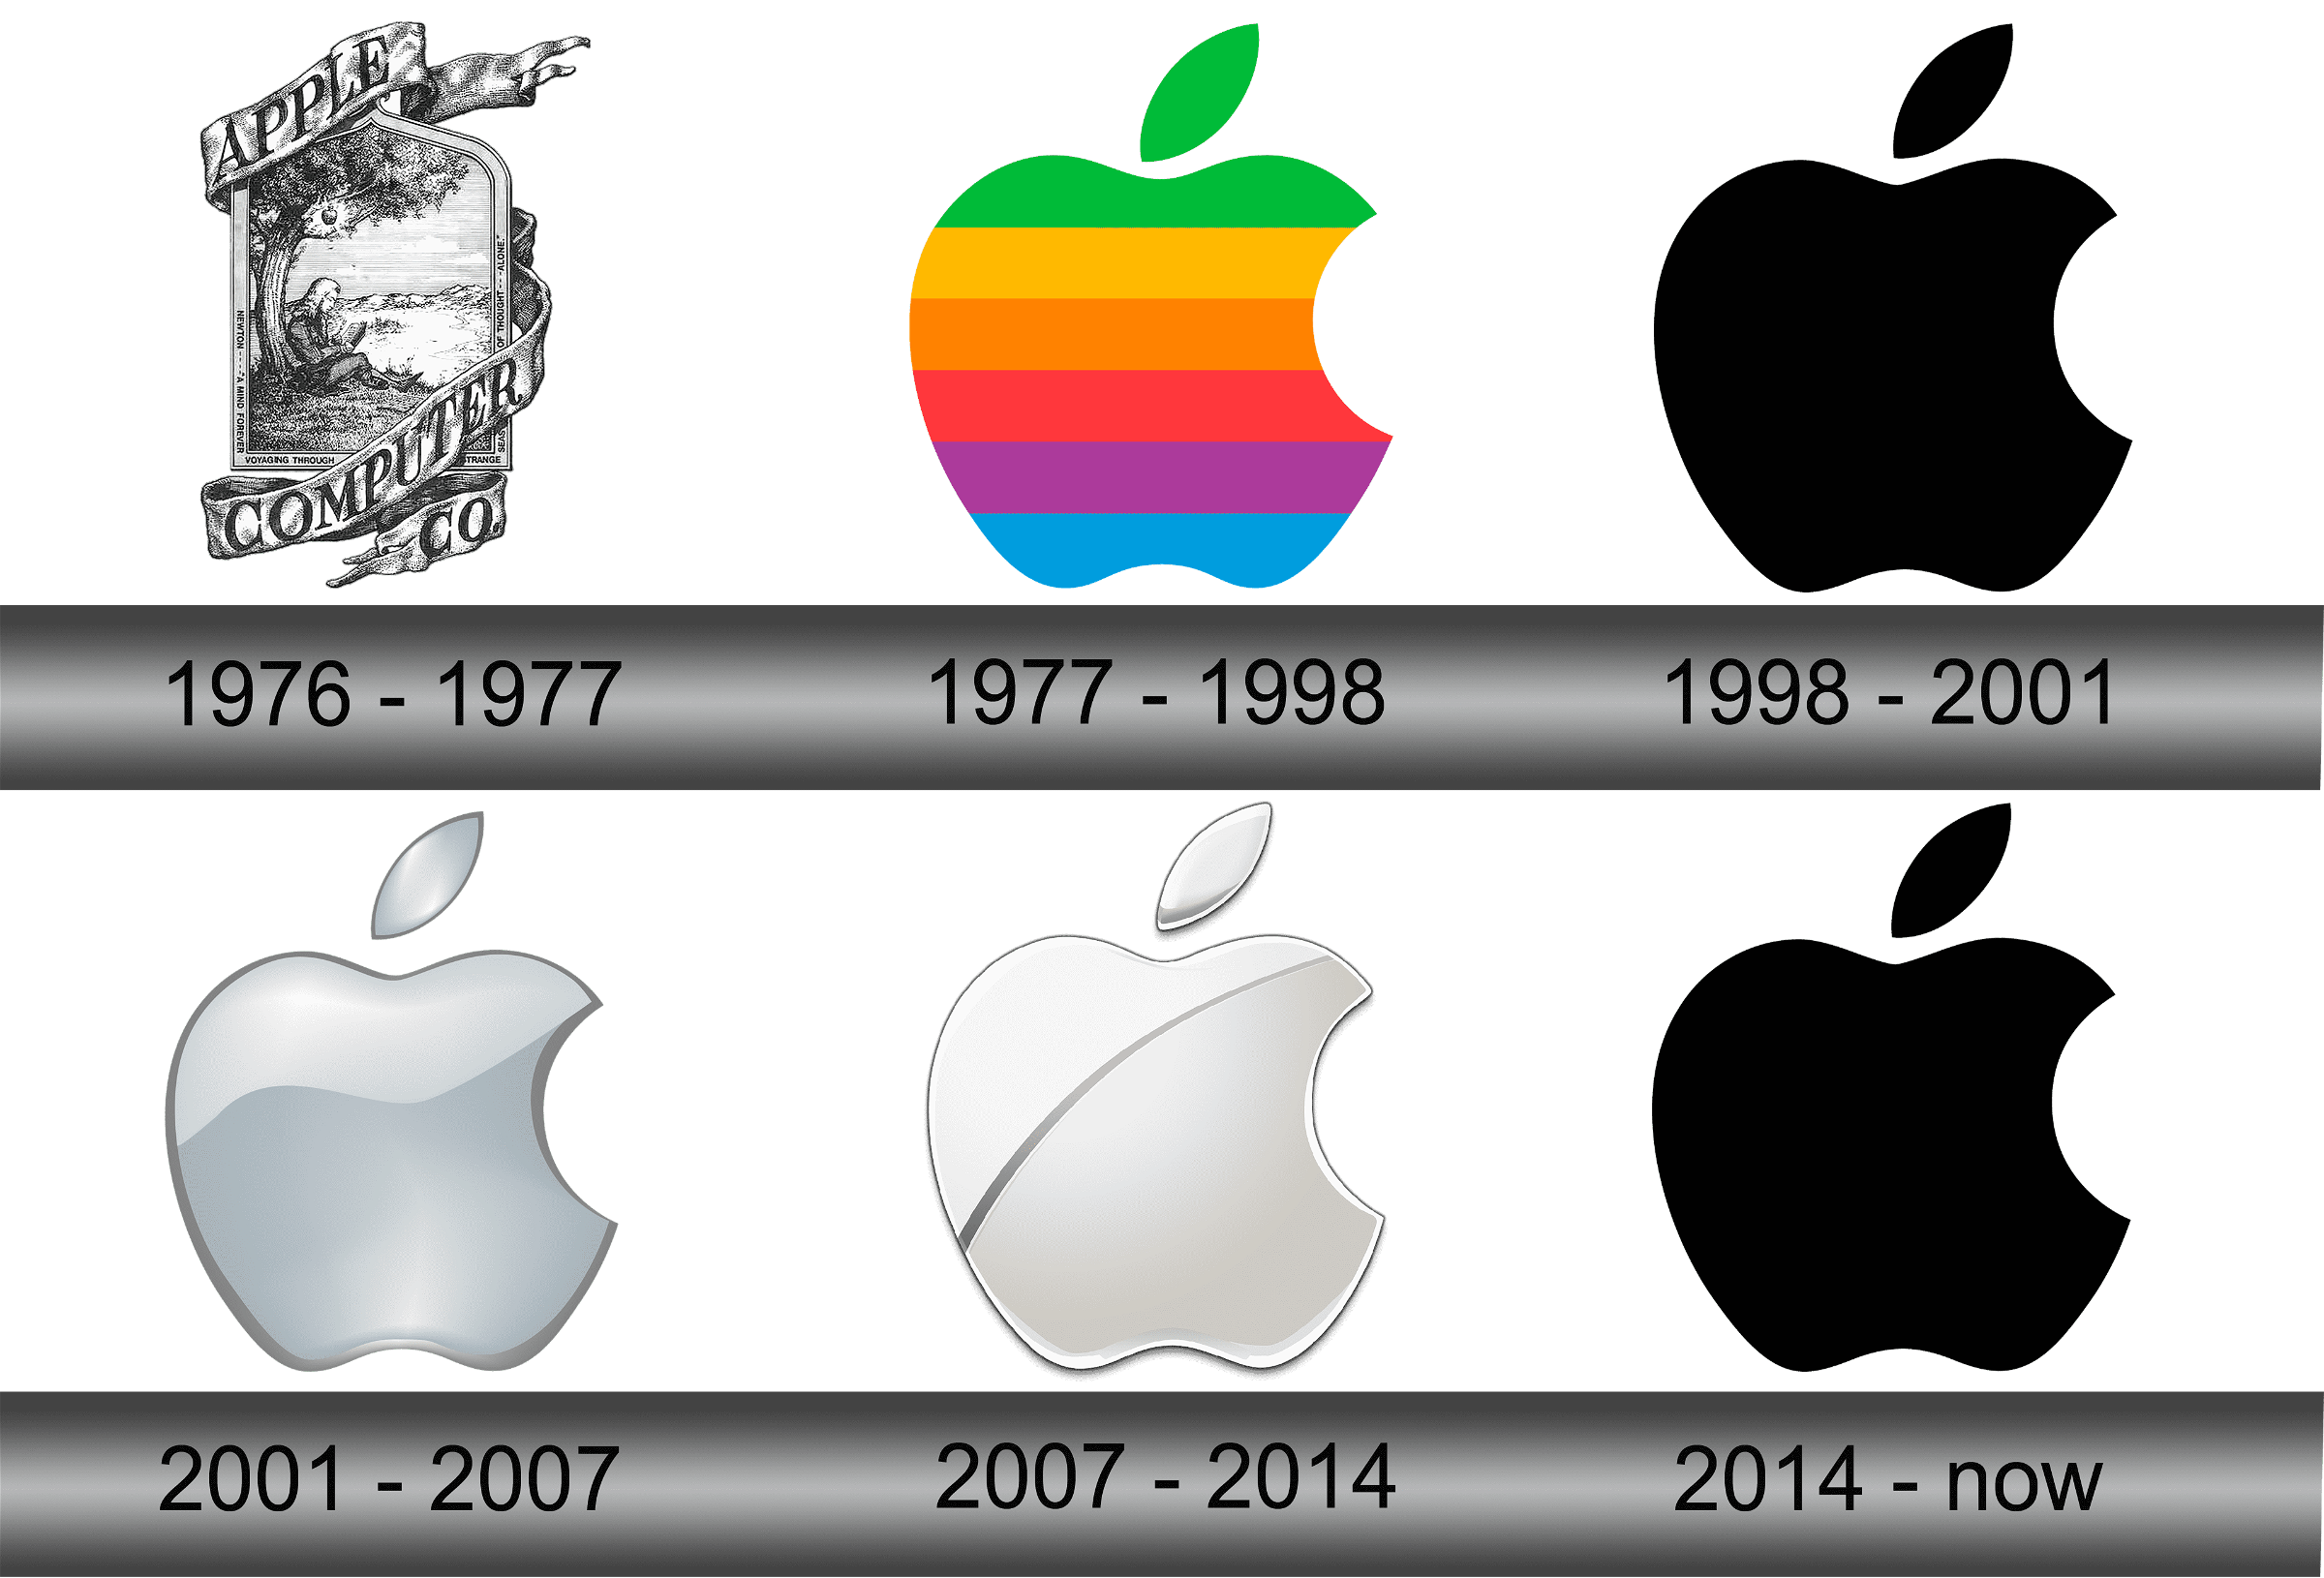 Logo Evolution of The World's Iconic Brands - History and Development